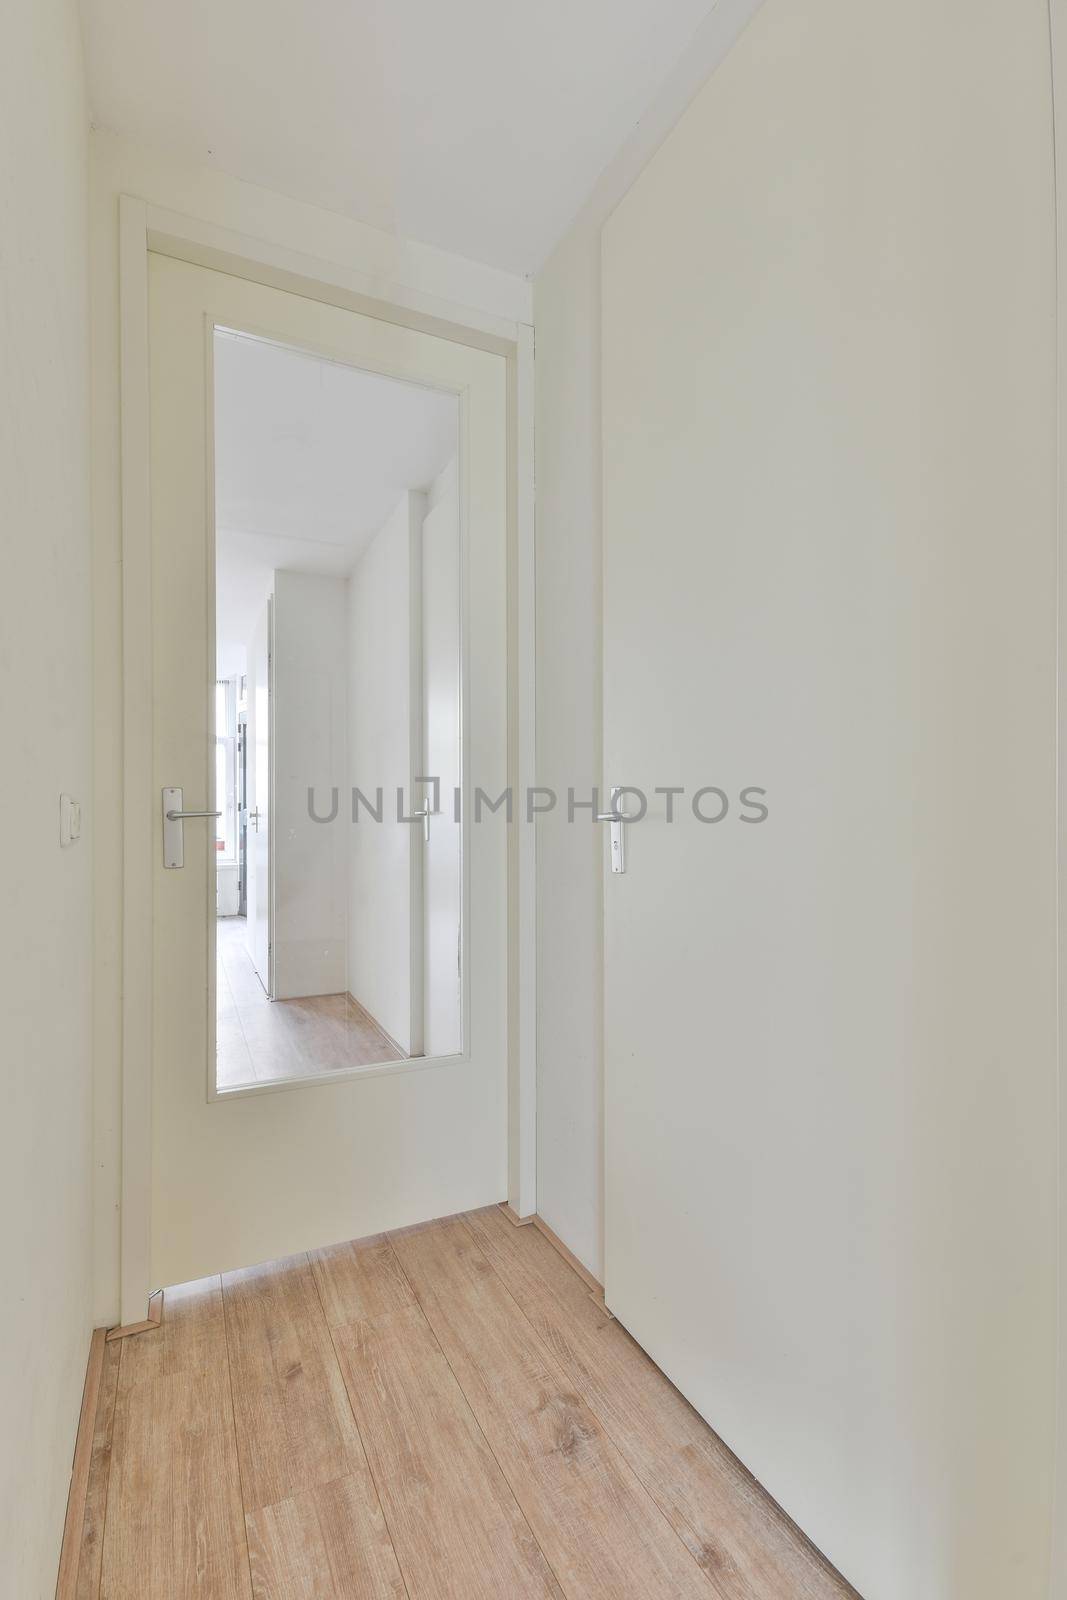 Interior of empty room with painted white wall